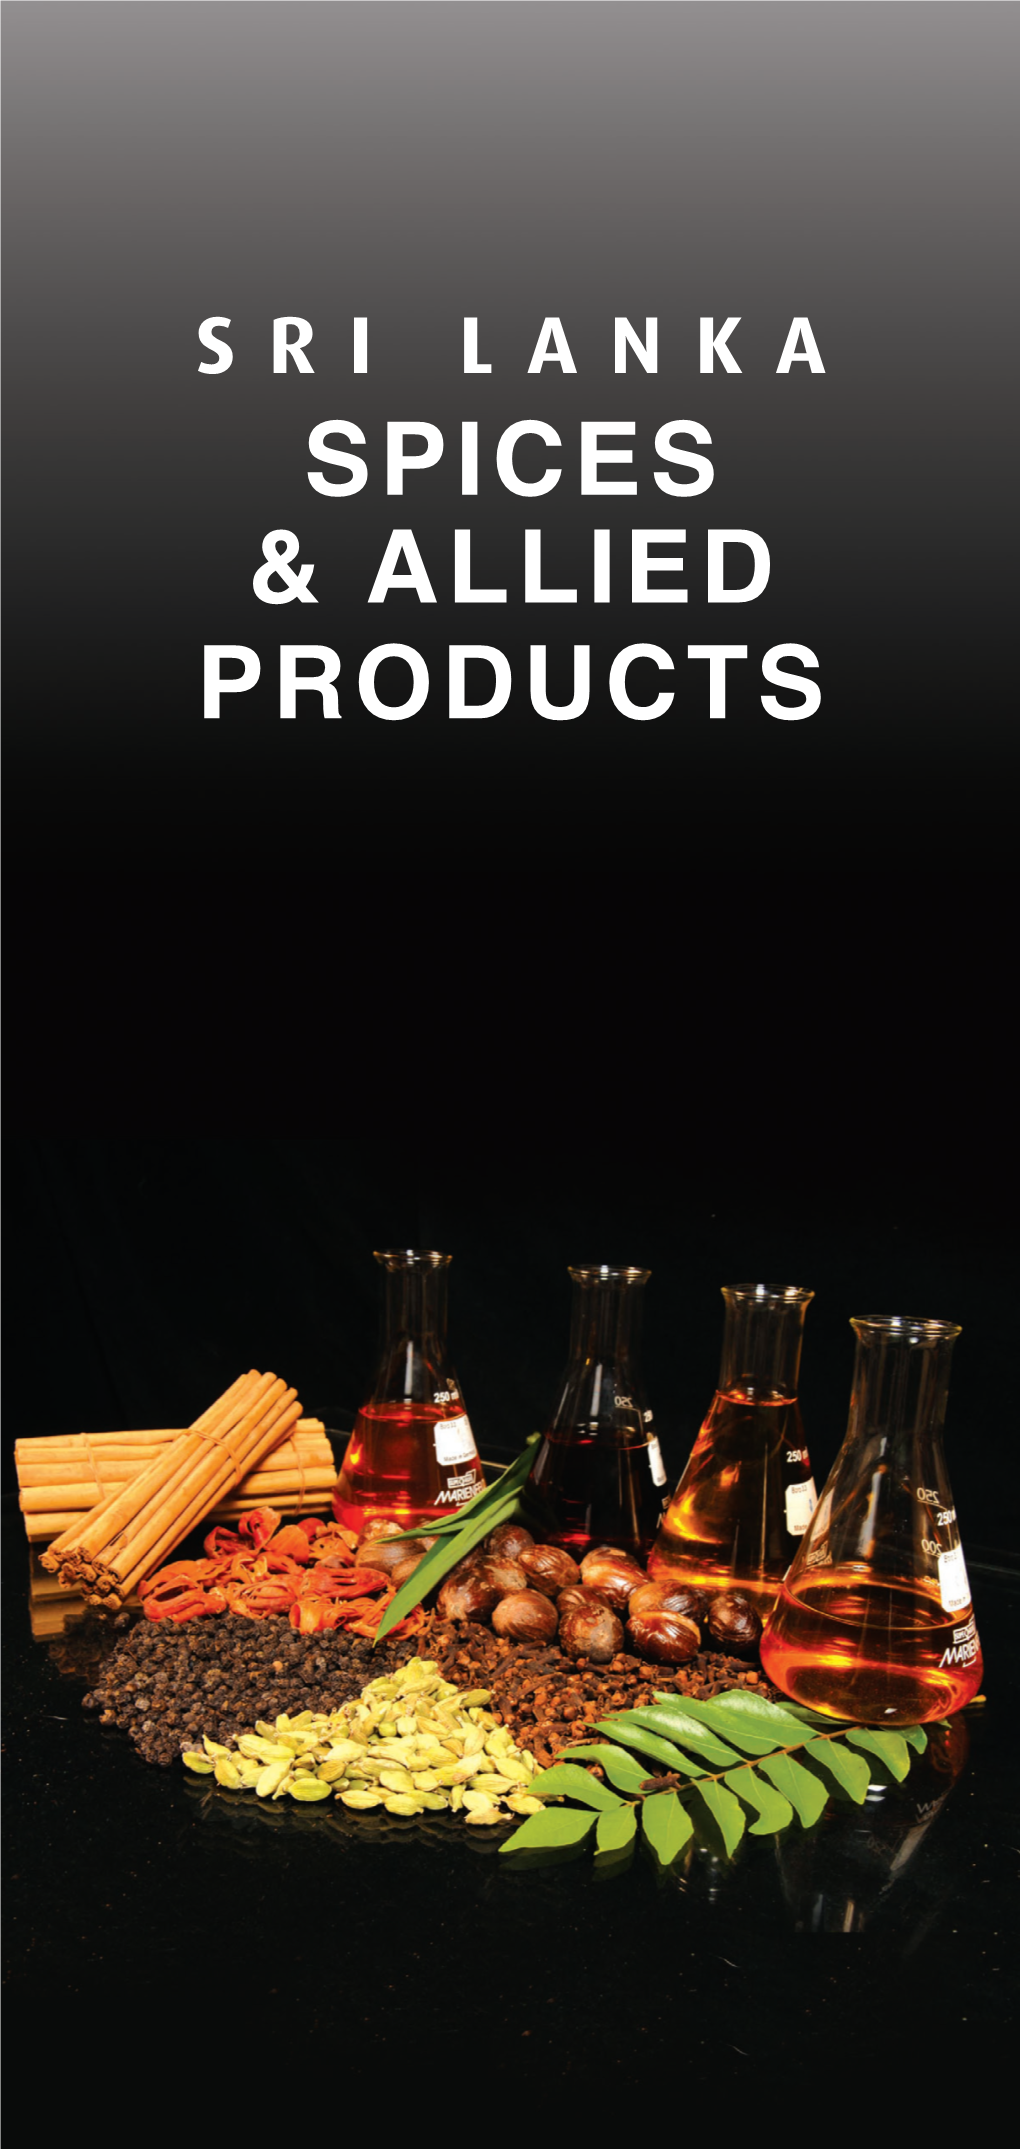 Spices & Allied Products